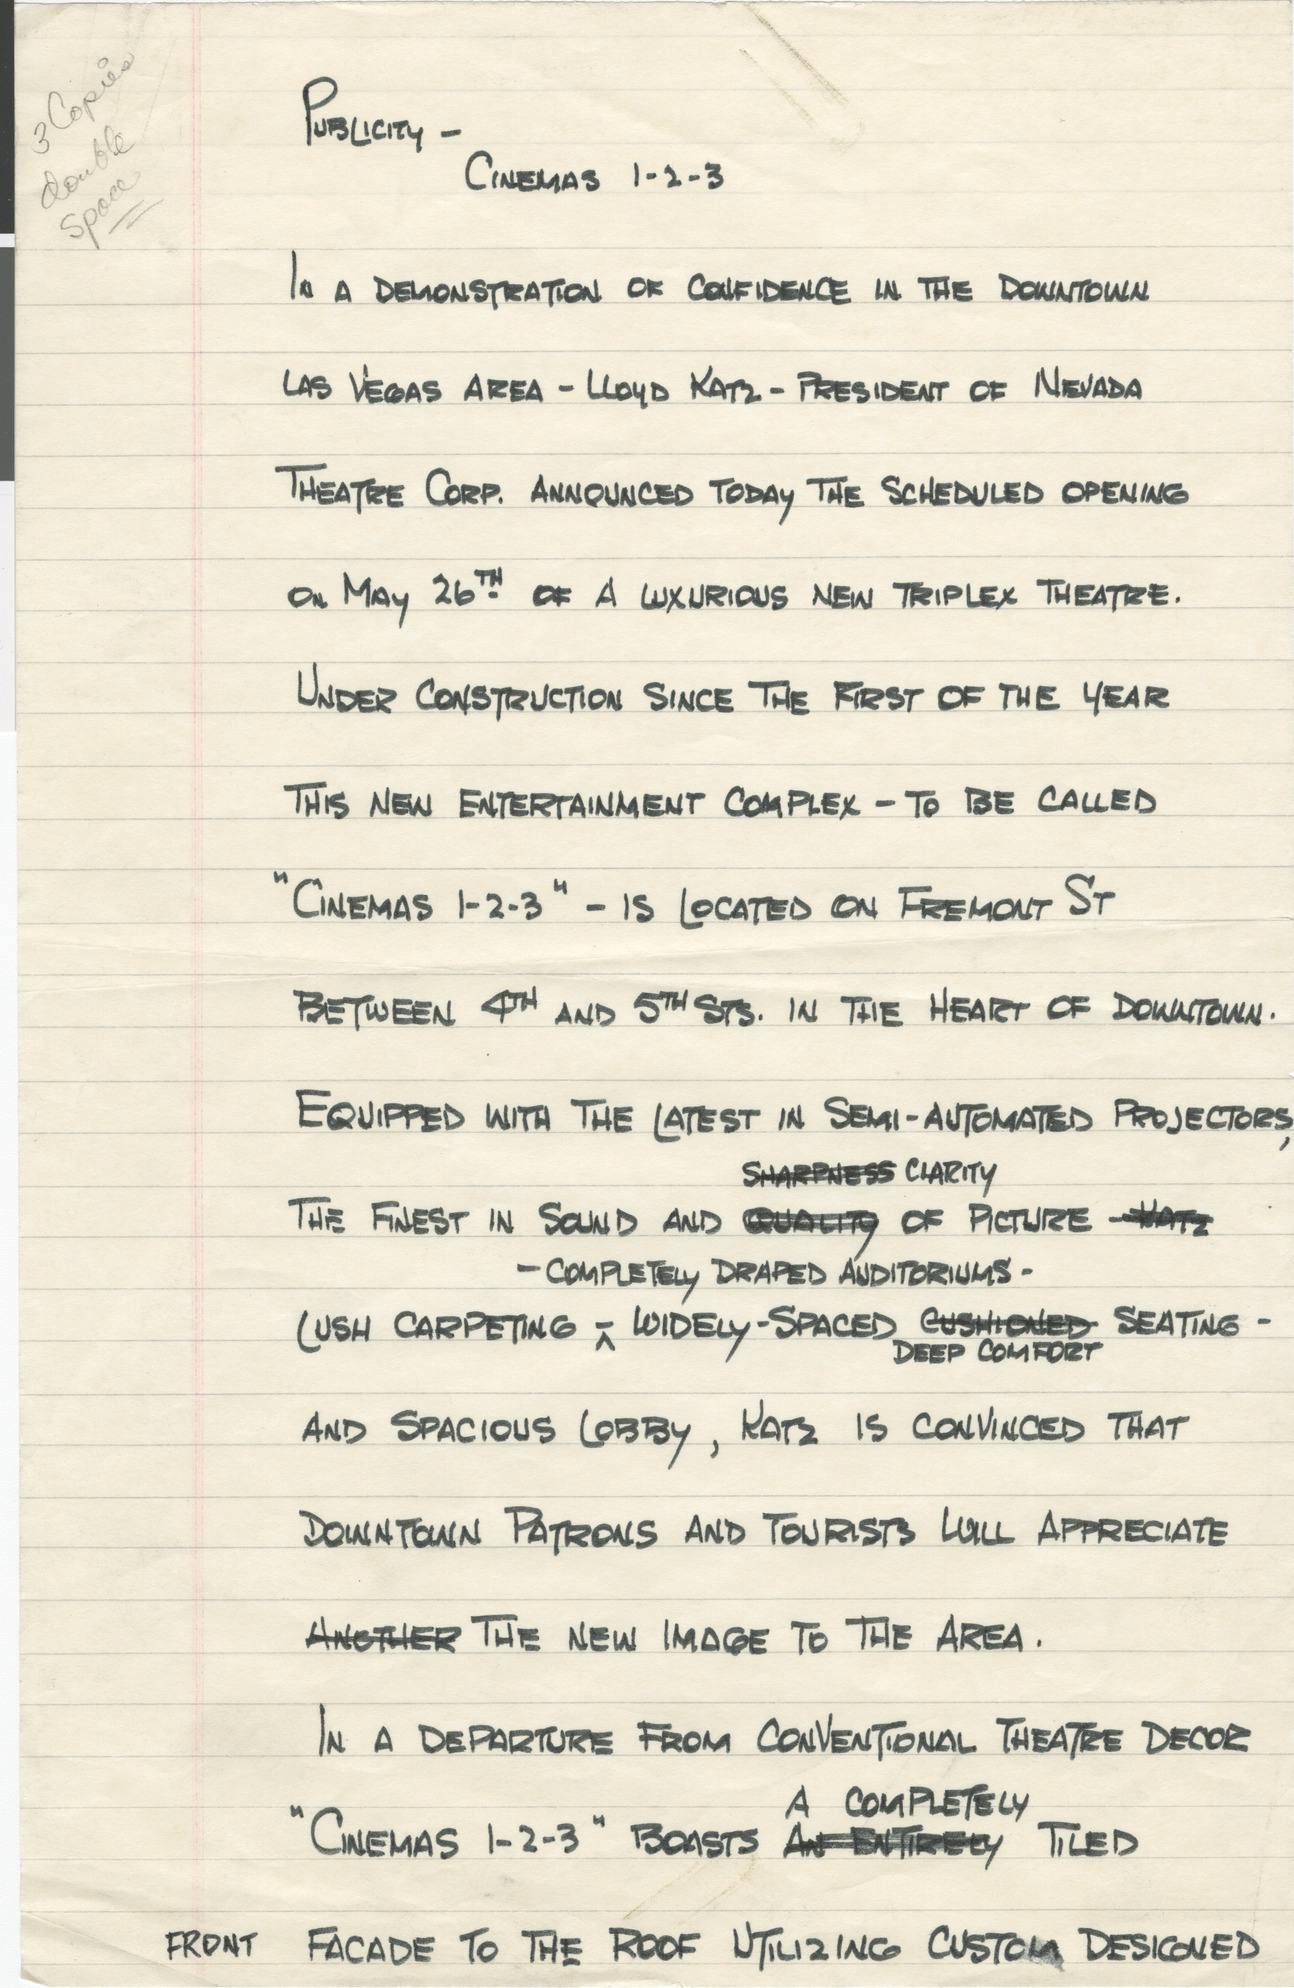 Handwritten press release for opening of Cinemas 1-2-3, page 1